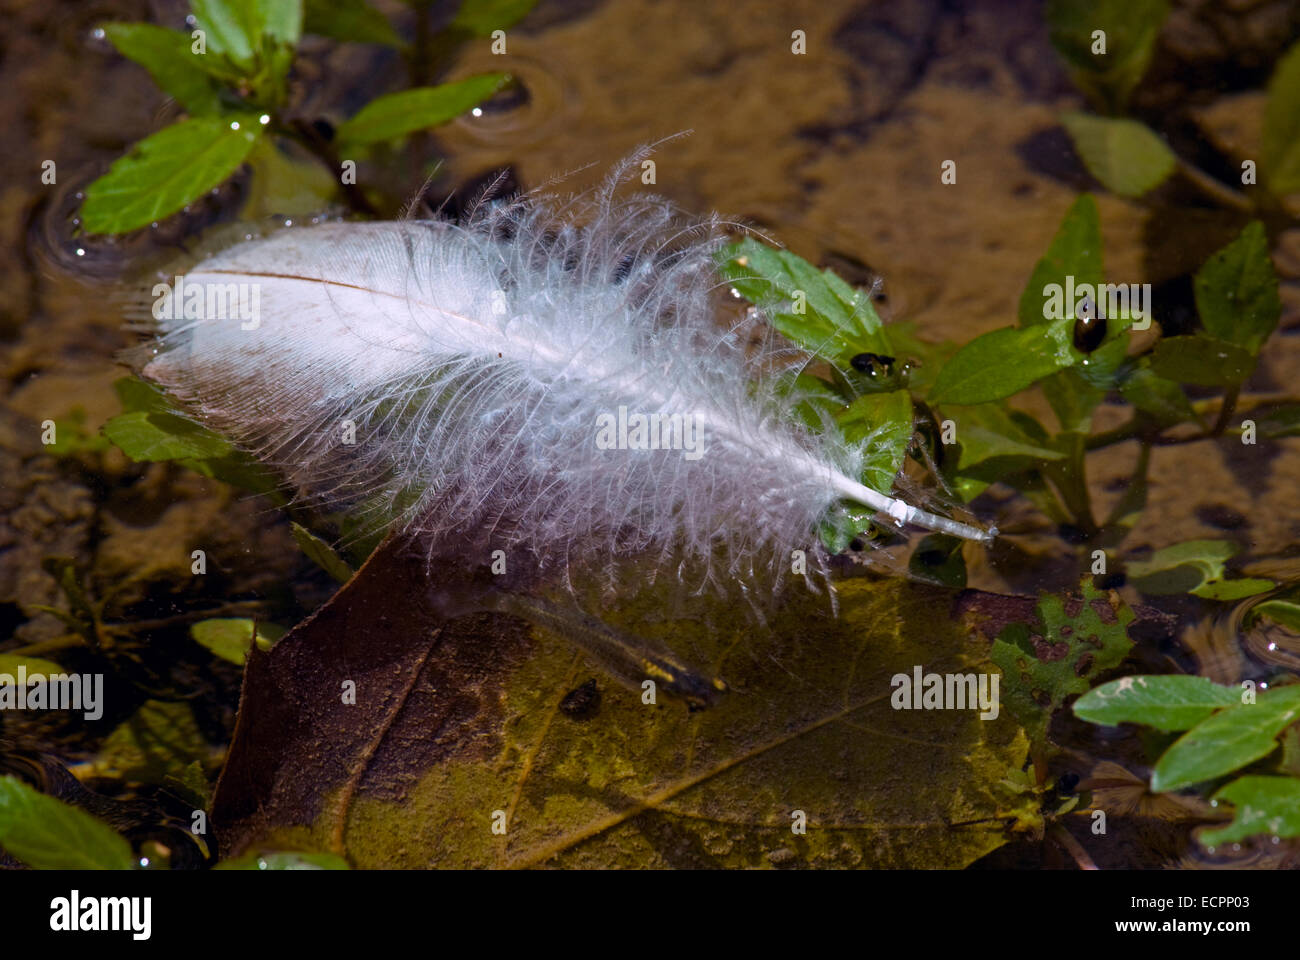 A bird's feather floats on top of a shallow part of Griffy Lake, near Bloomington, Indiana, USA. Stock Photo